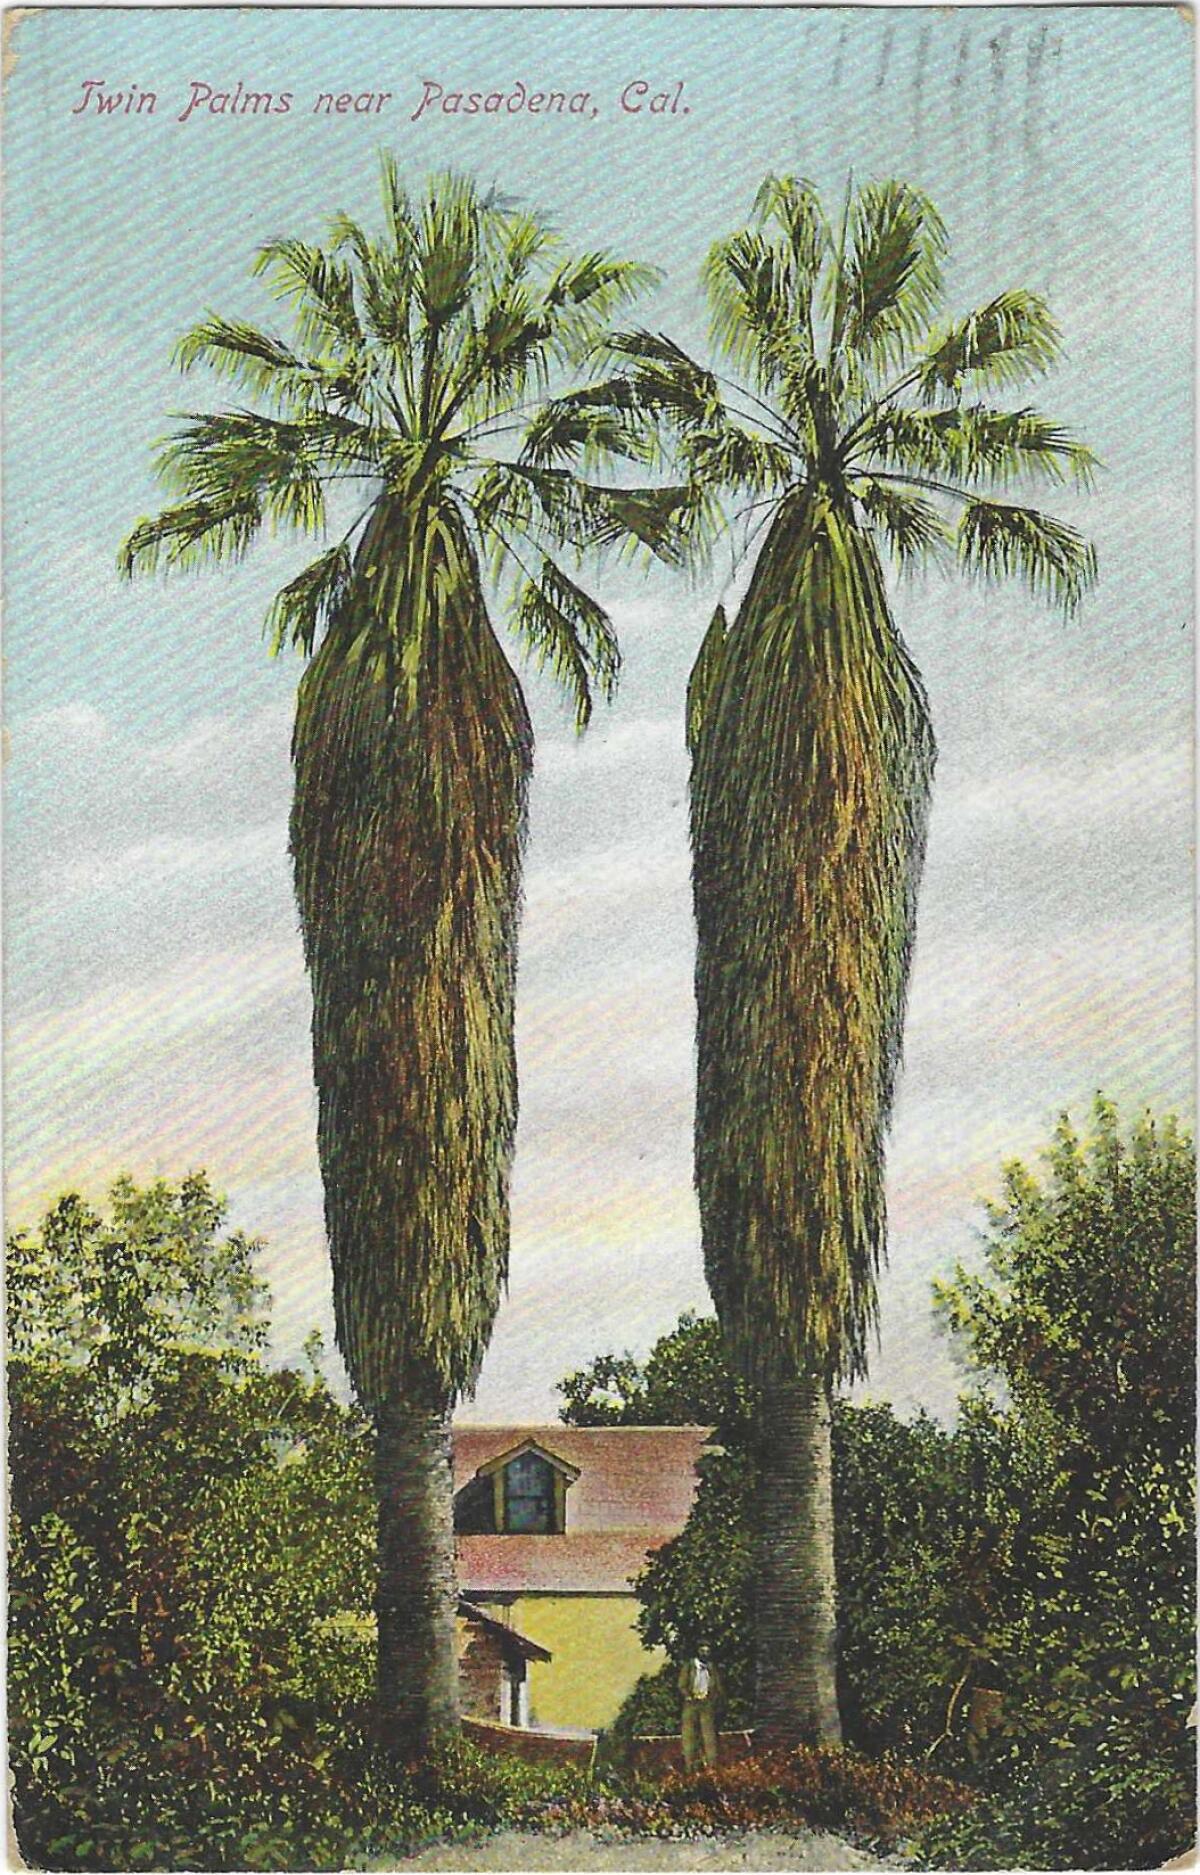 "Twin Palms near Pasadena, Cal." reads a vintage postcard showing a pair of trees framing a small yellow home.